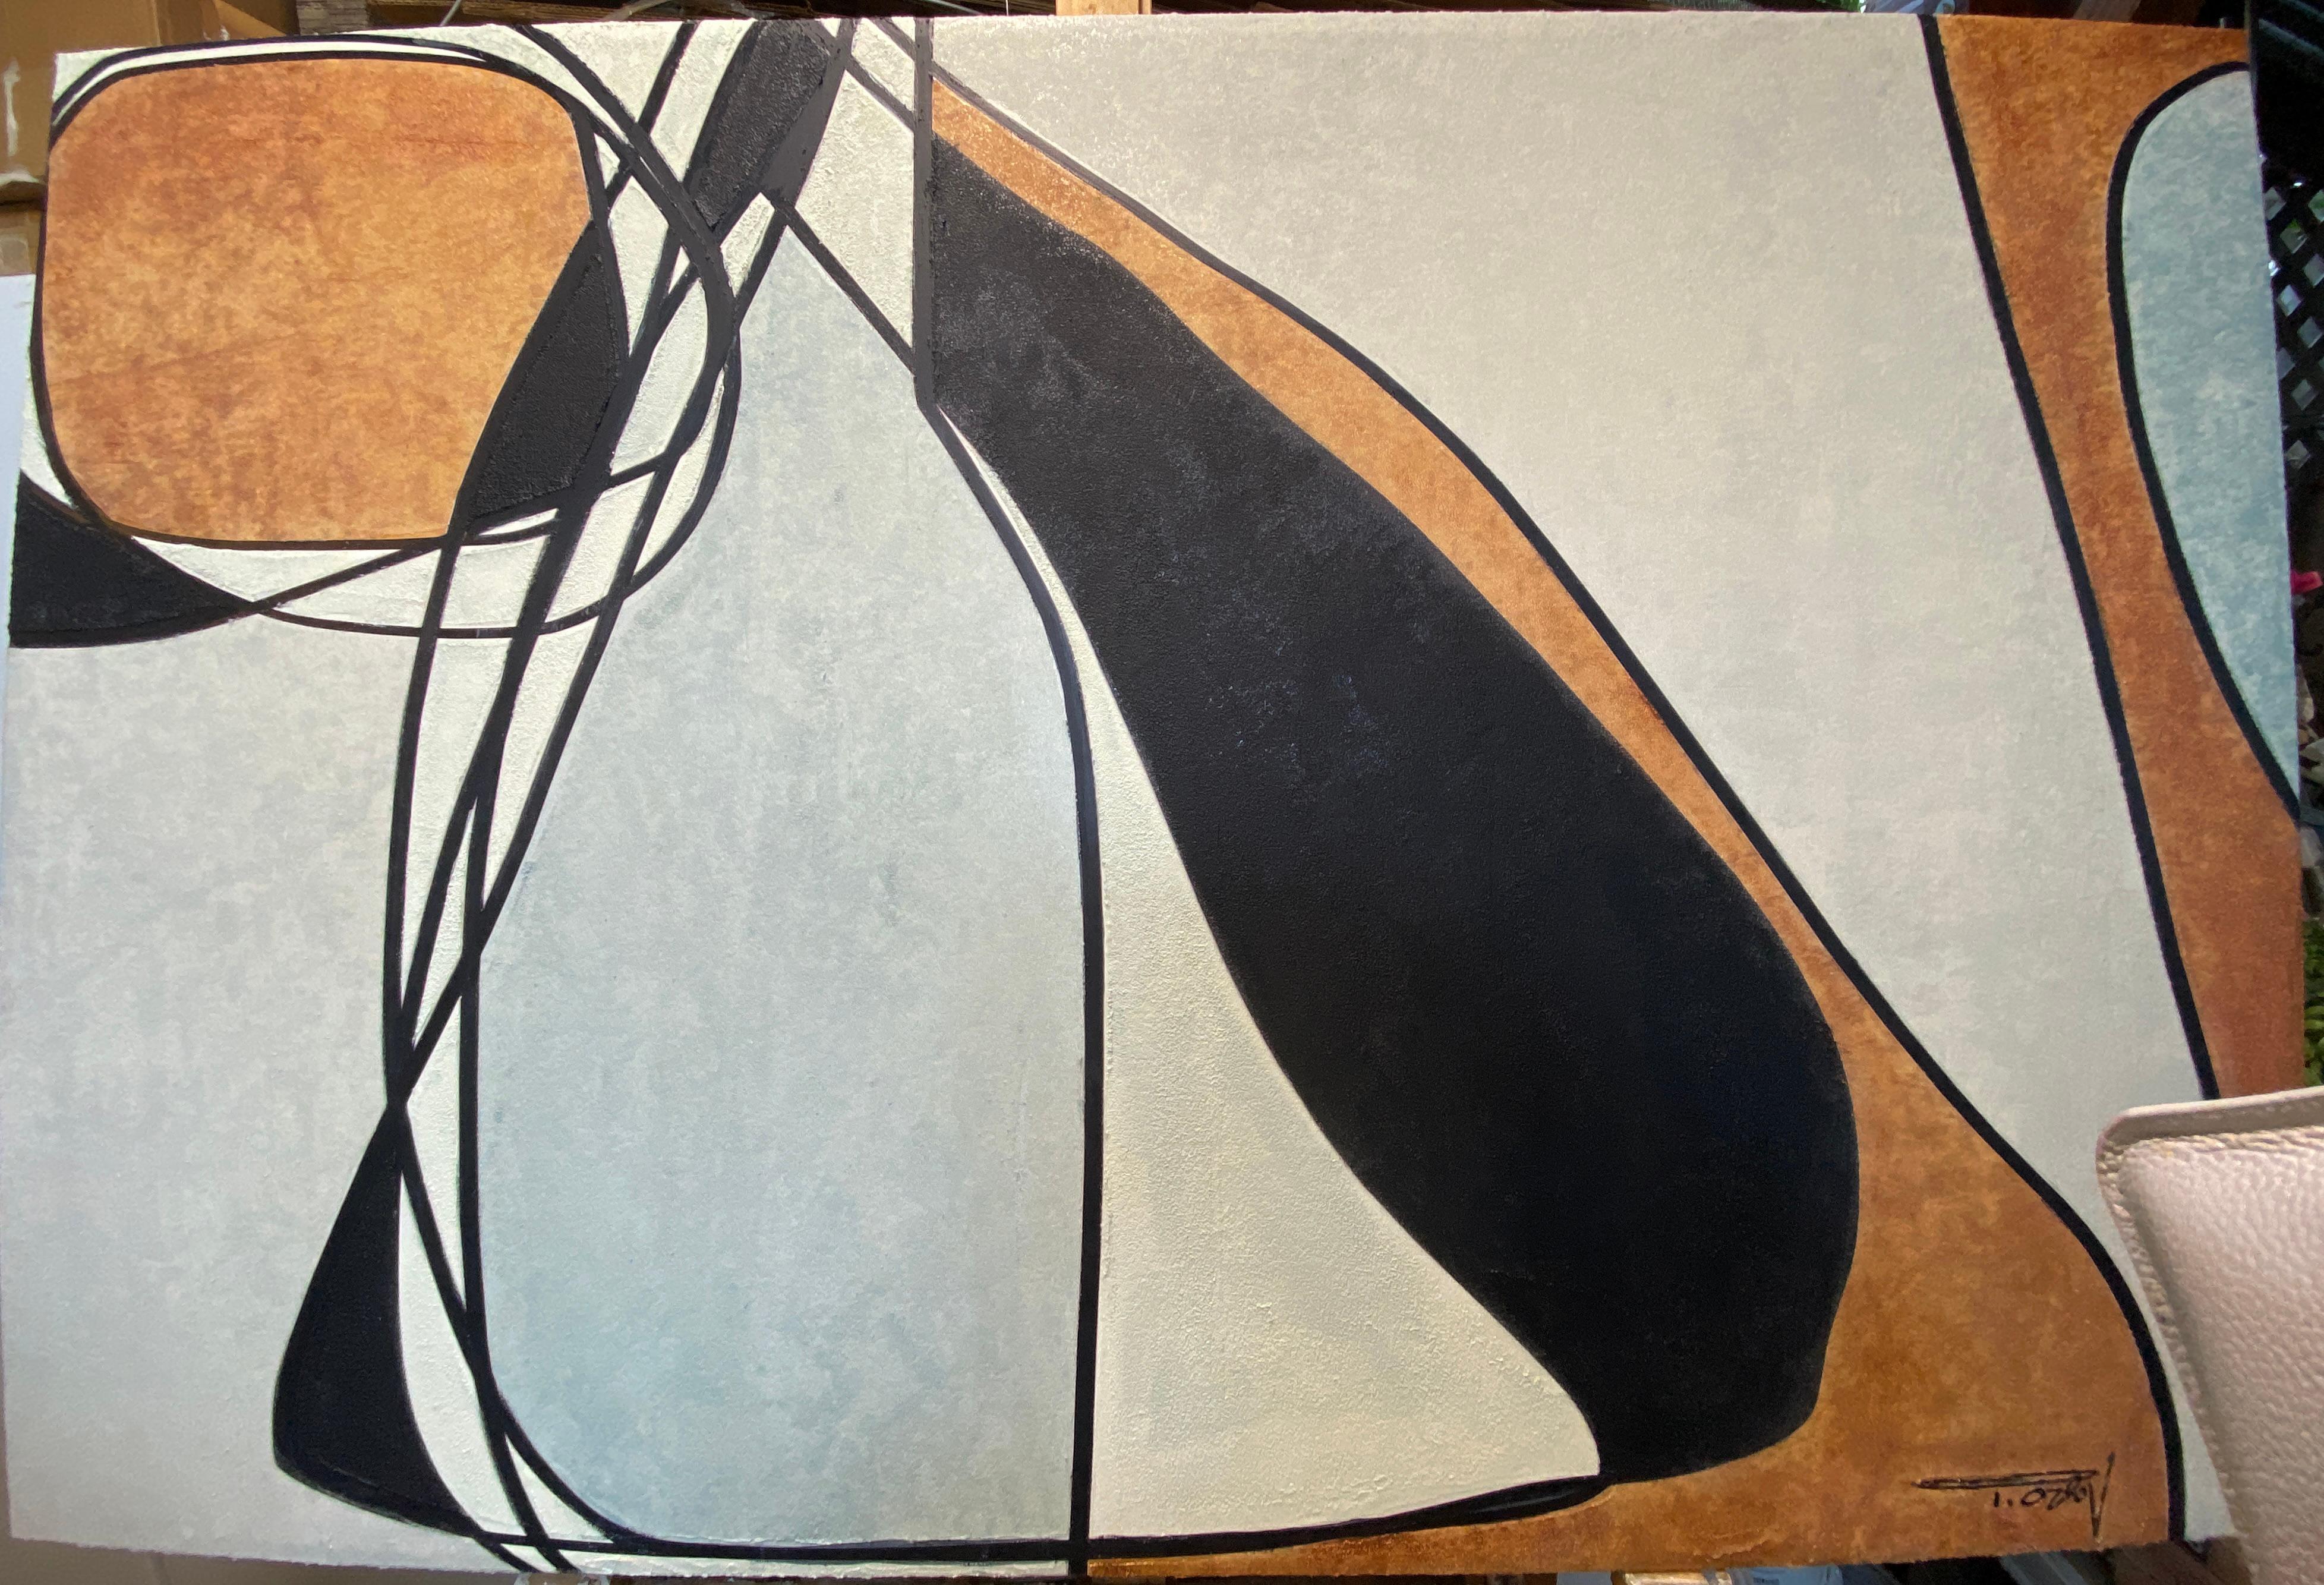 Mid Century Modern Abstract Line Art Painting Mixed Media on Canvas

Stretched on 1.5